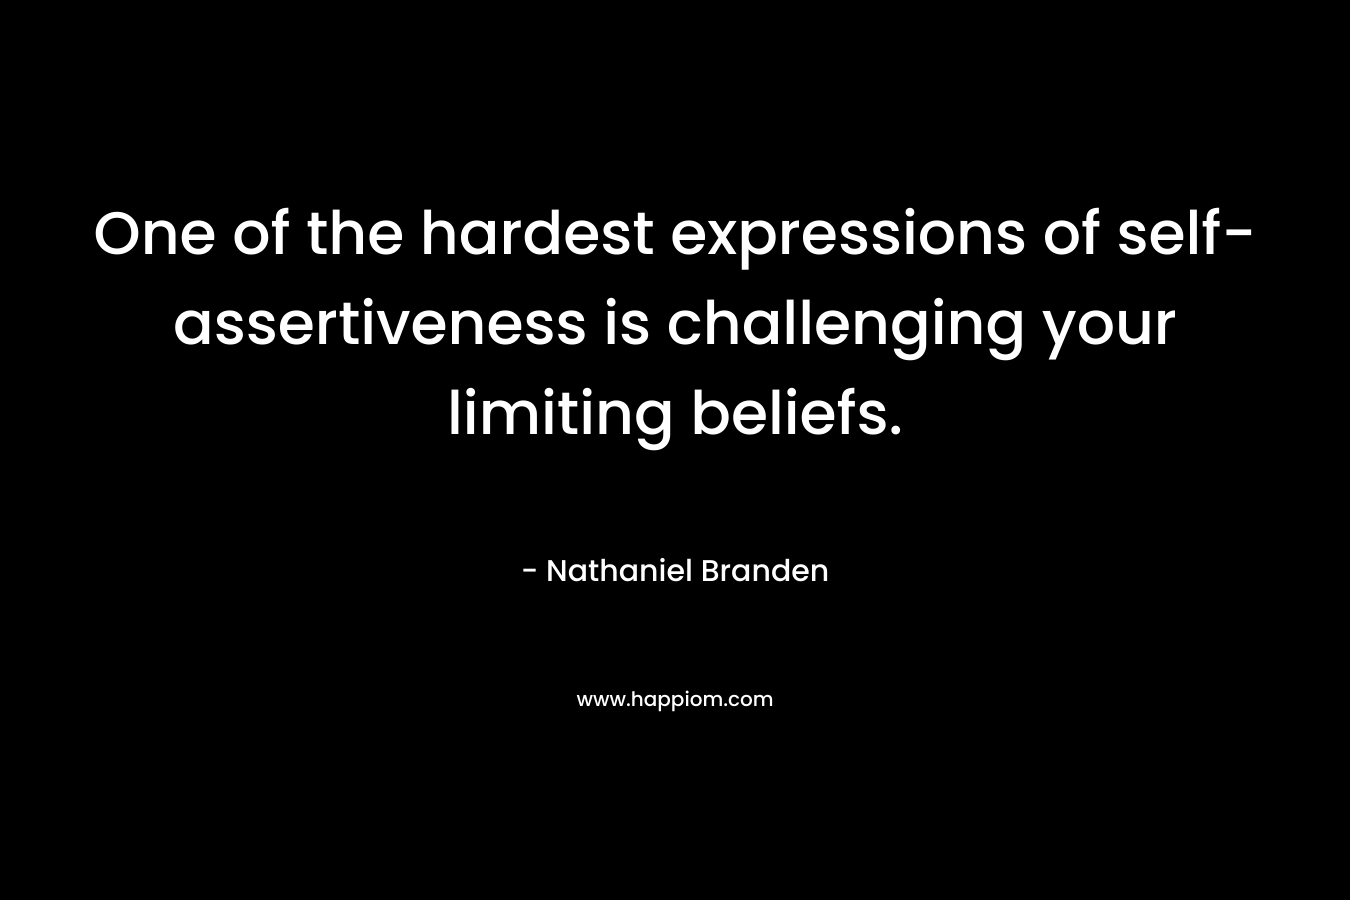 One of the hardest expressions of self-assertiveness is challenging your limiting beliefs.